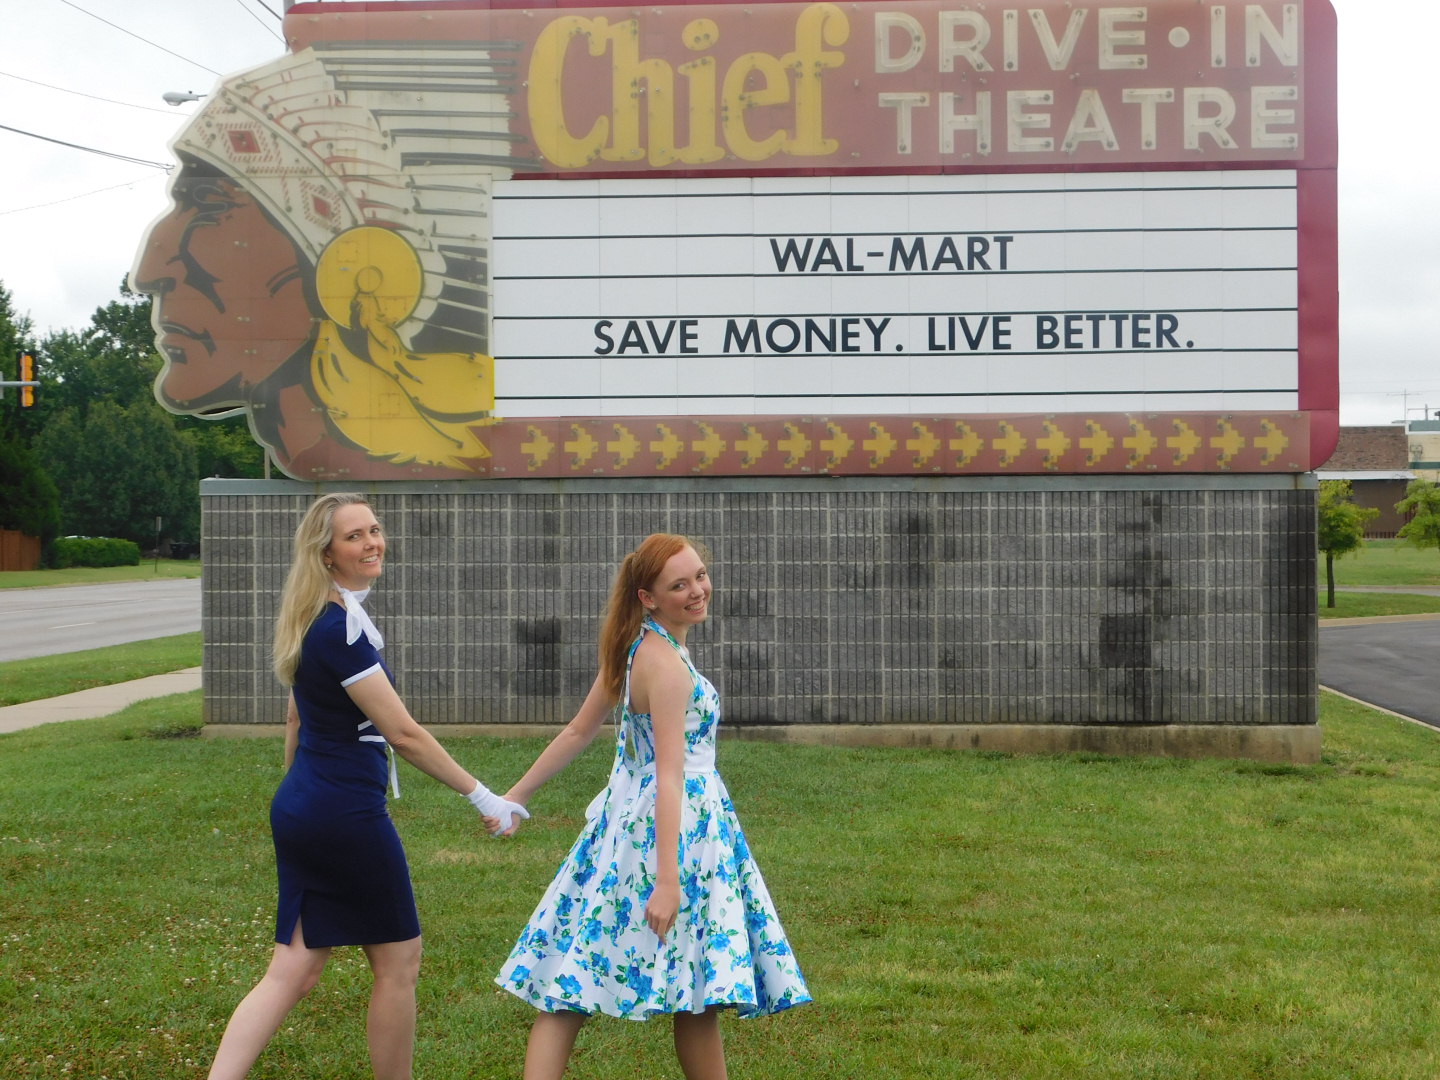 Chief Drive In sign, 37th Street. Kudos to Wal-Mart for not only saving but preserving the glorious piece of Topeka architecture.